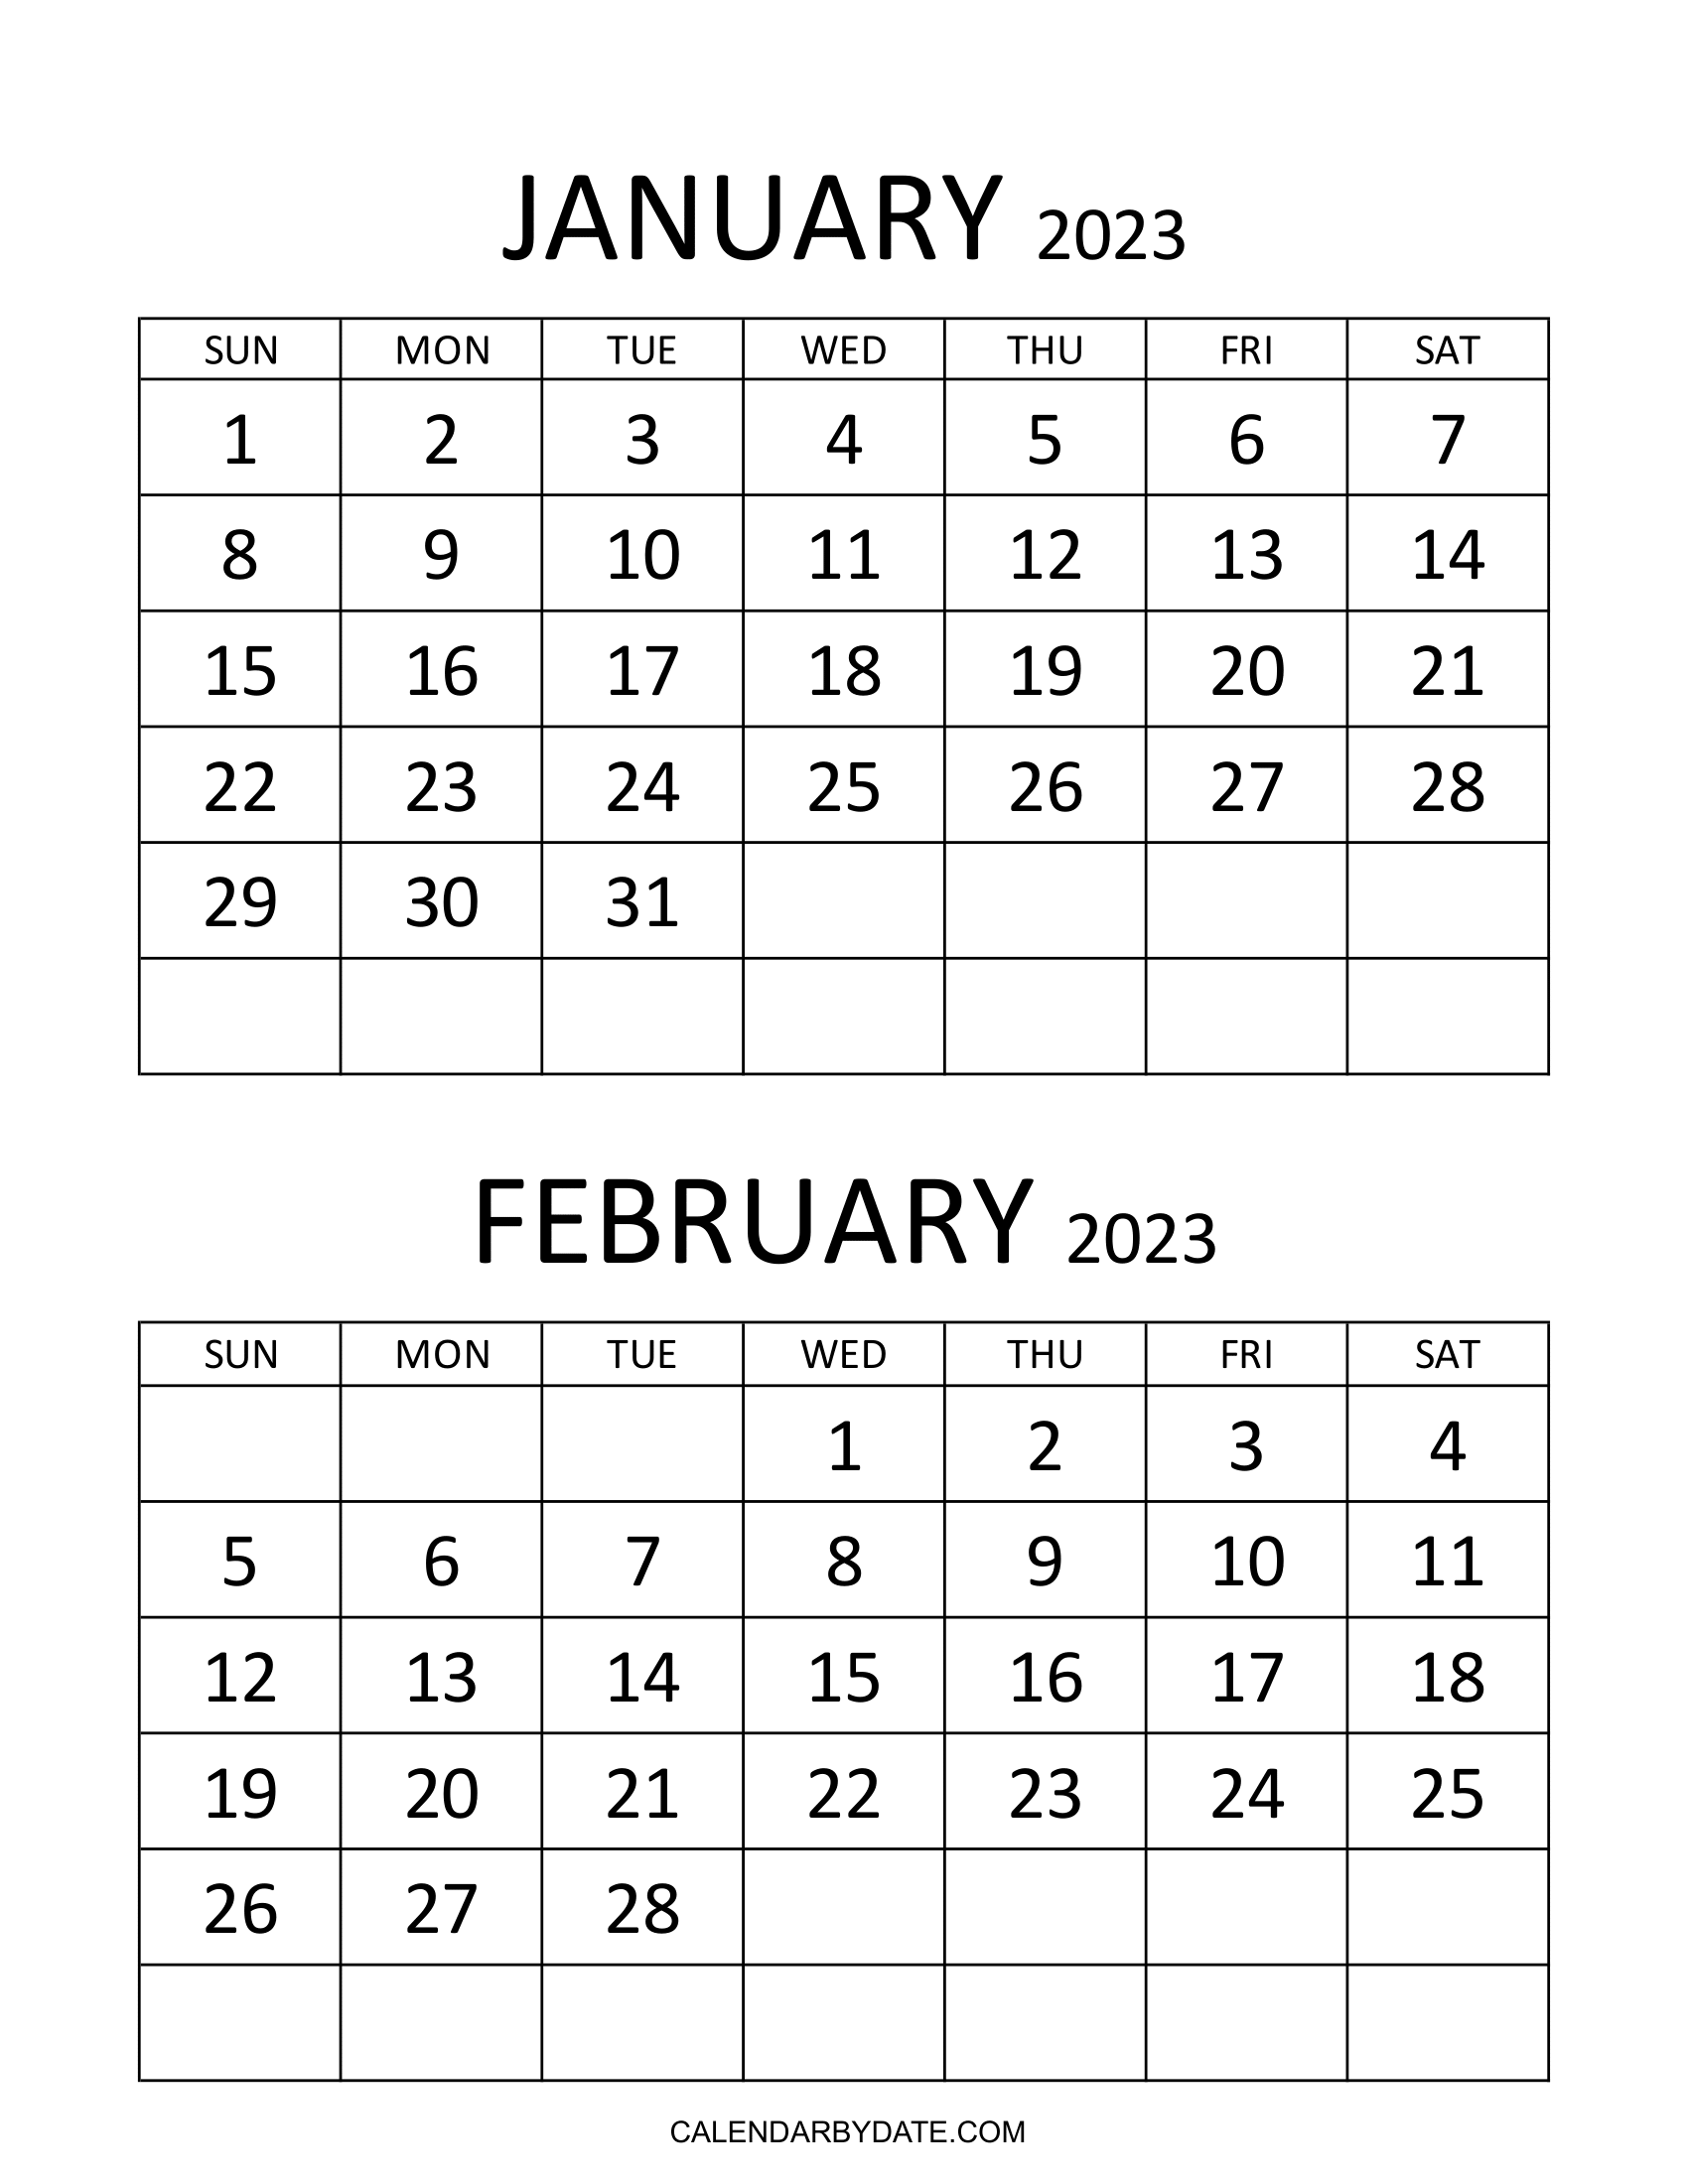 January February 2023 Calendar Printable Template with Bold Monthly Dates in the Grid.